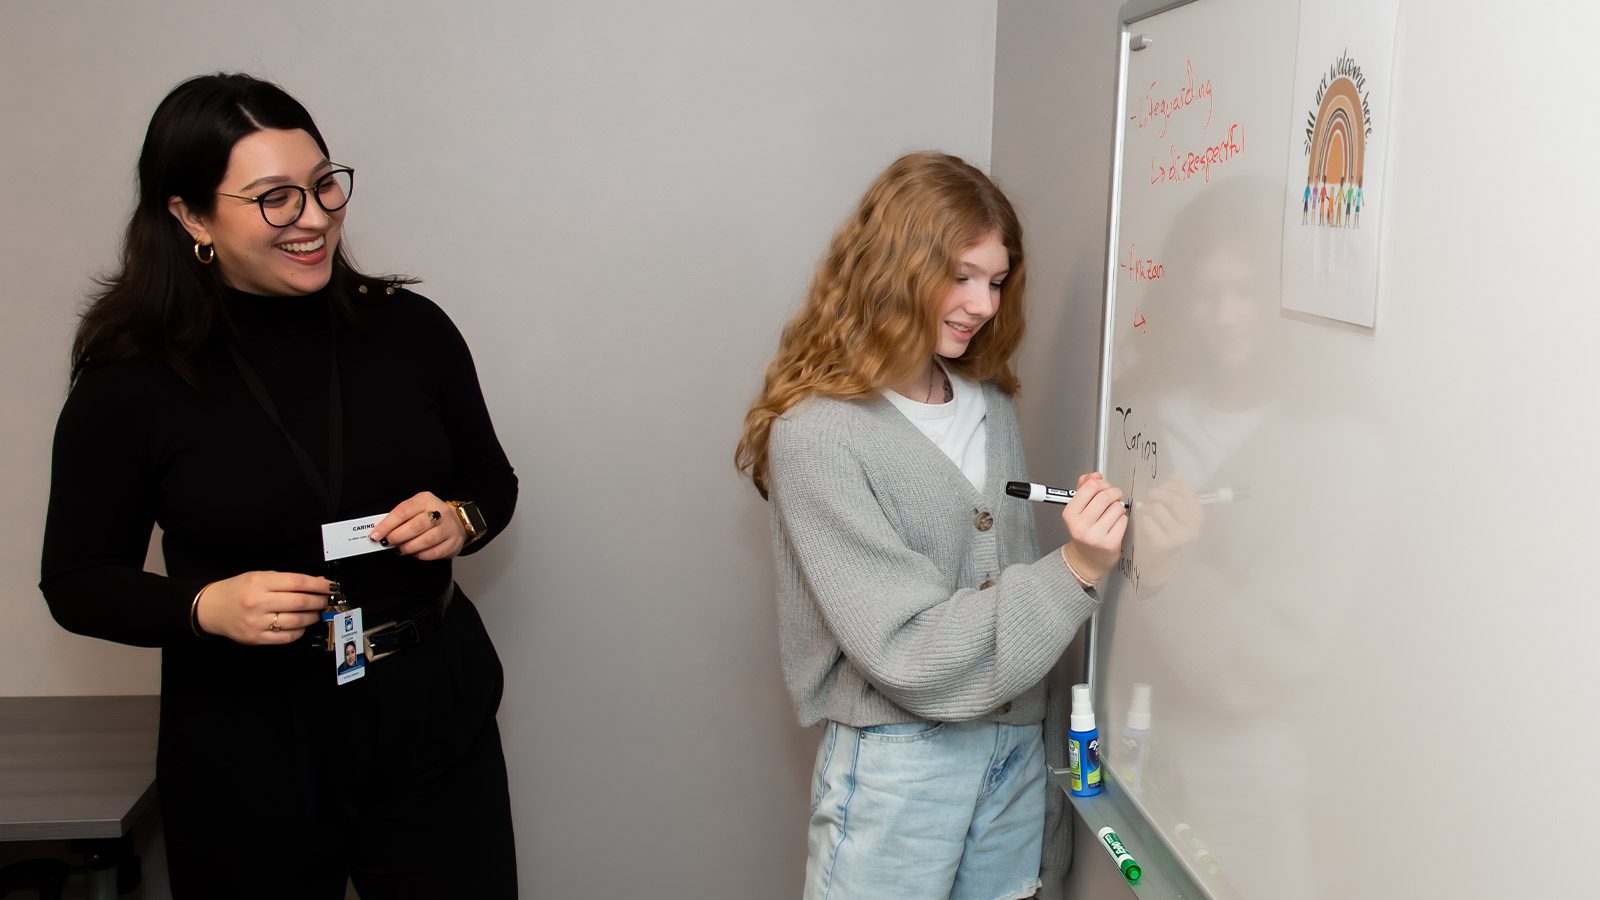 A young woman writing on a whiteboard in a well-lit room with the teacher observing.